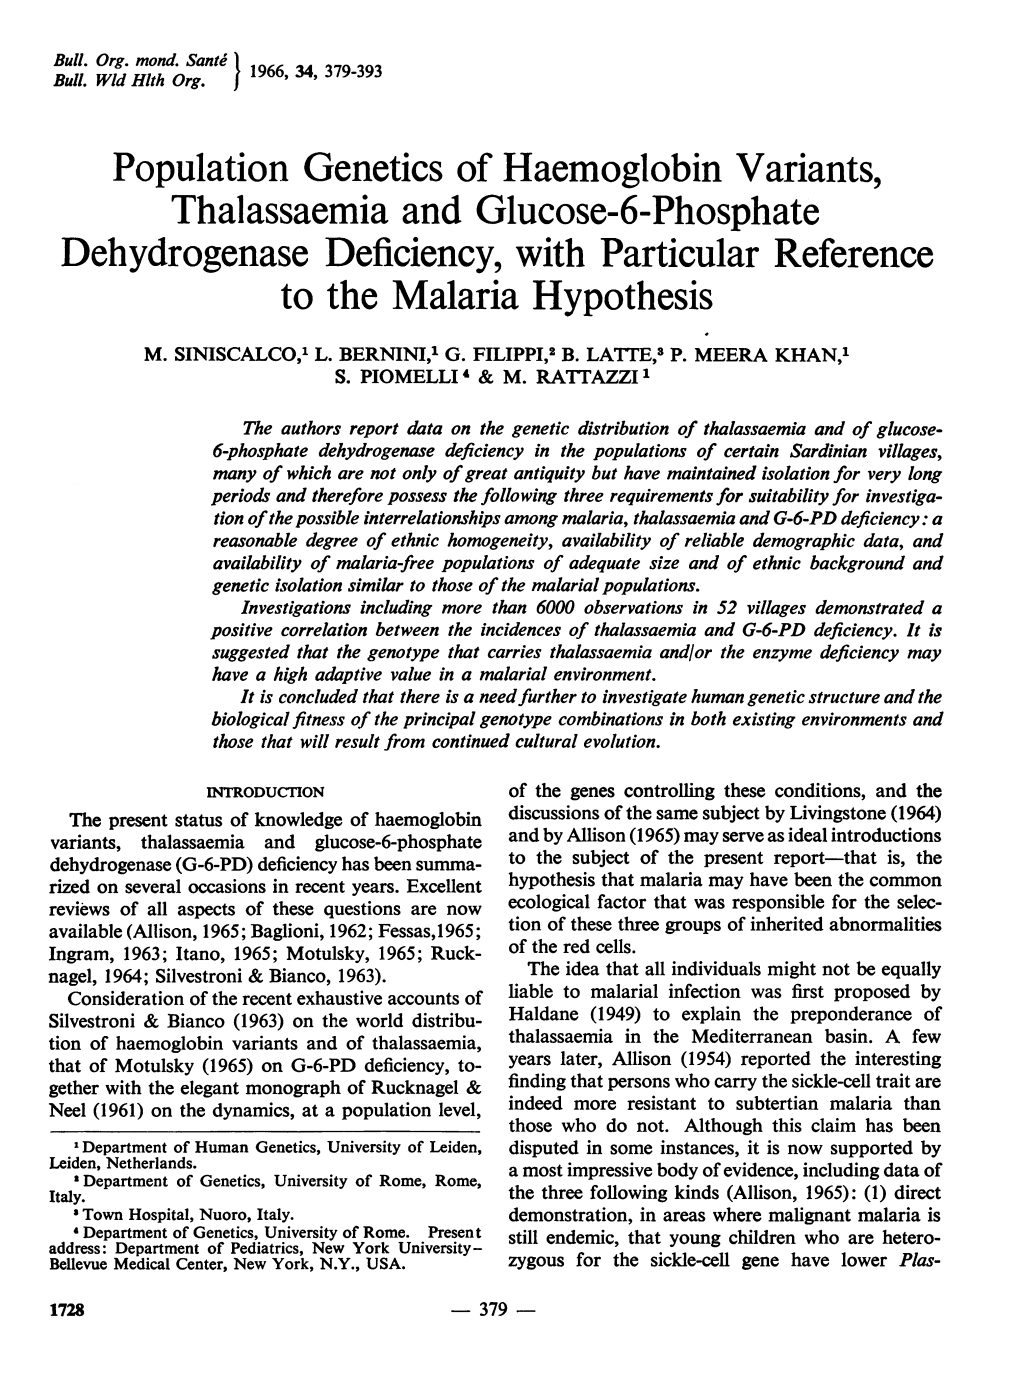 Thalassaemia and Glucose-6-Phosphate Dehydrogenase Deficiency, with Particular Reference to the Malaria Hypothesis